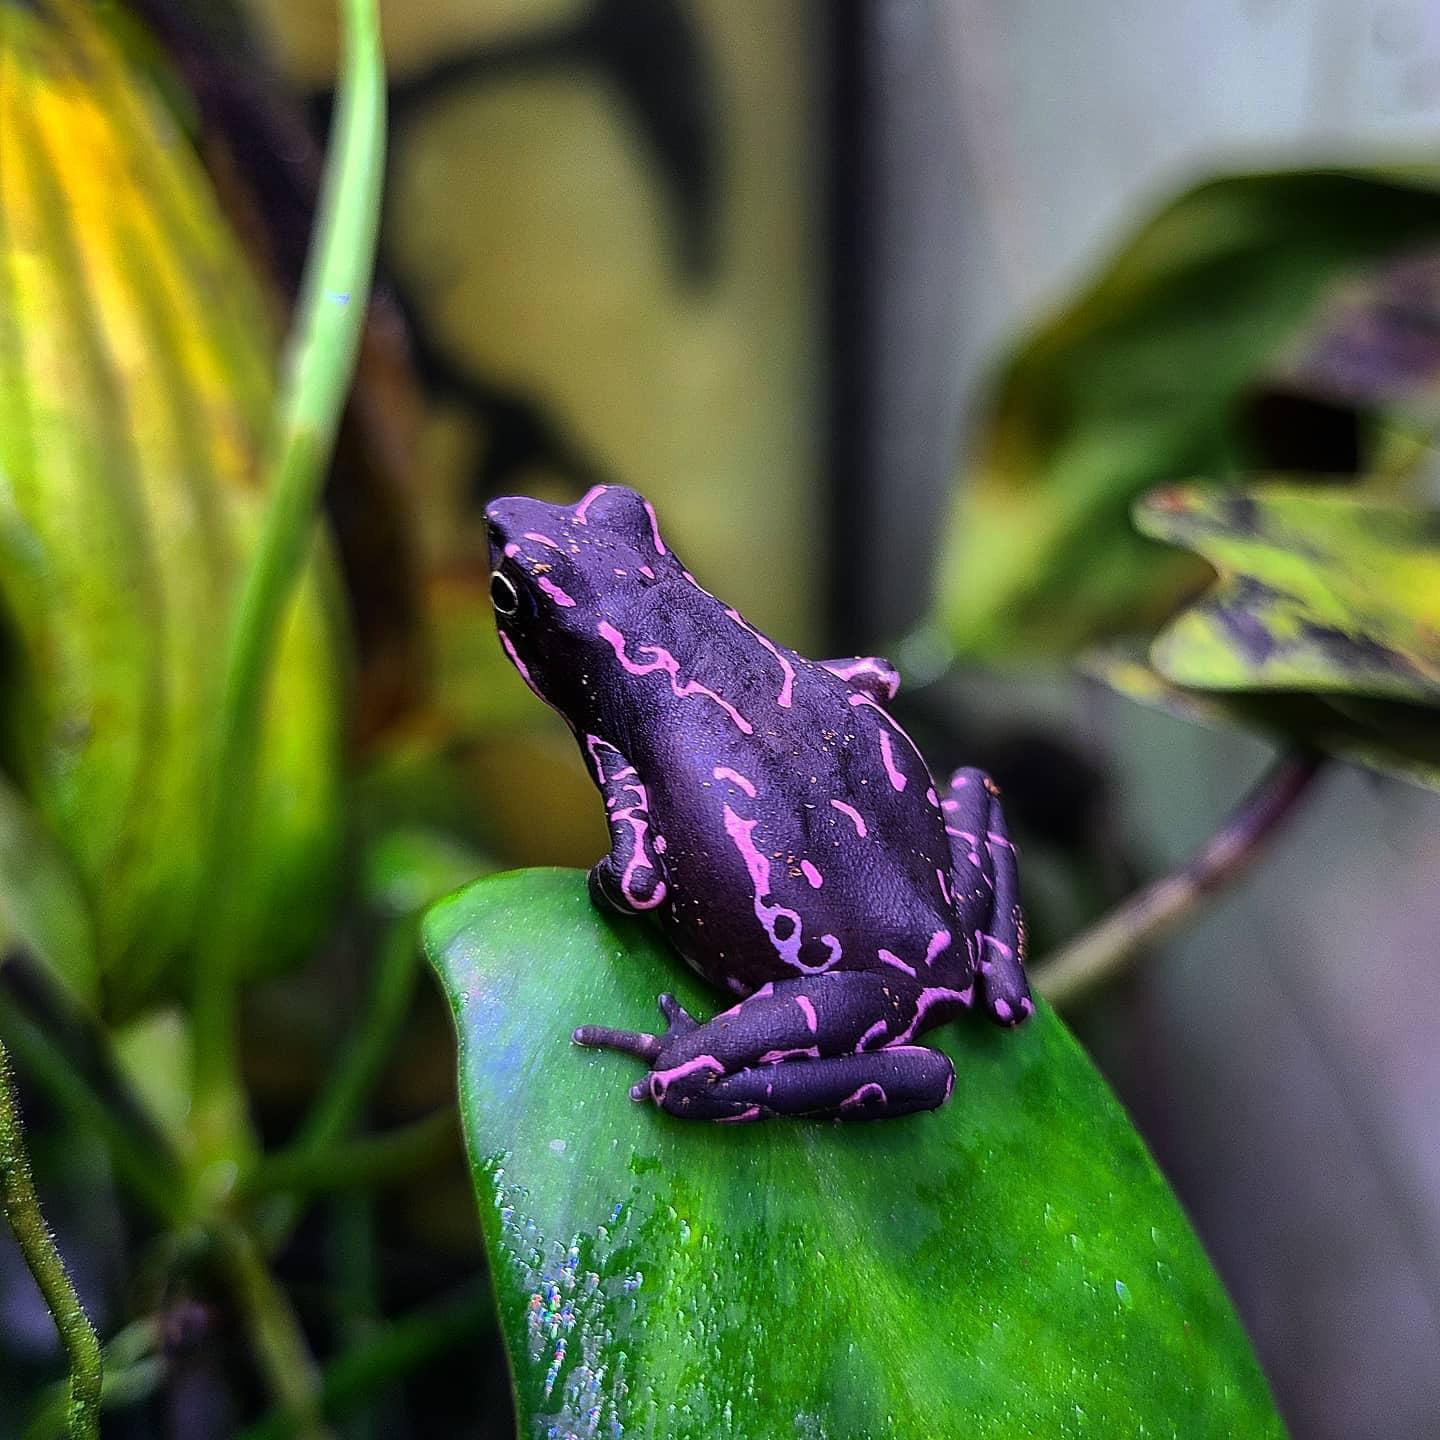 The Purple [People Eater] Harlequin Toad